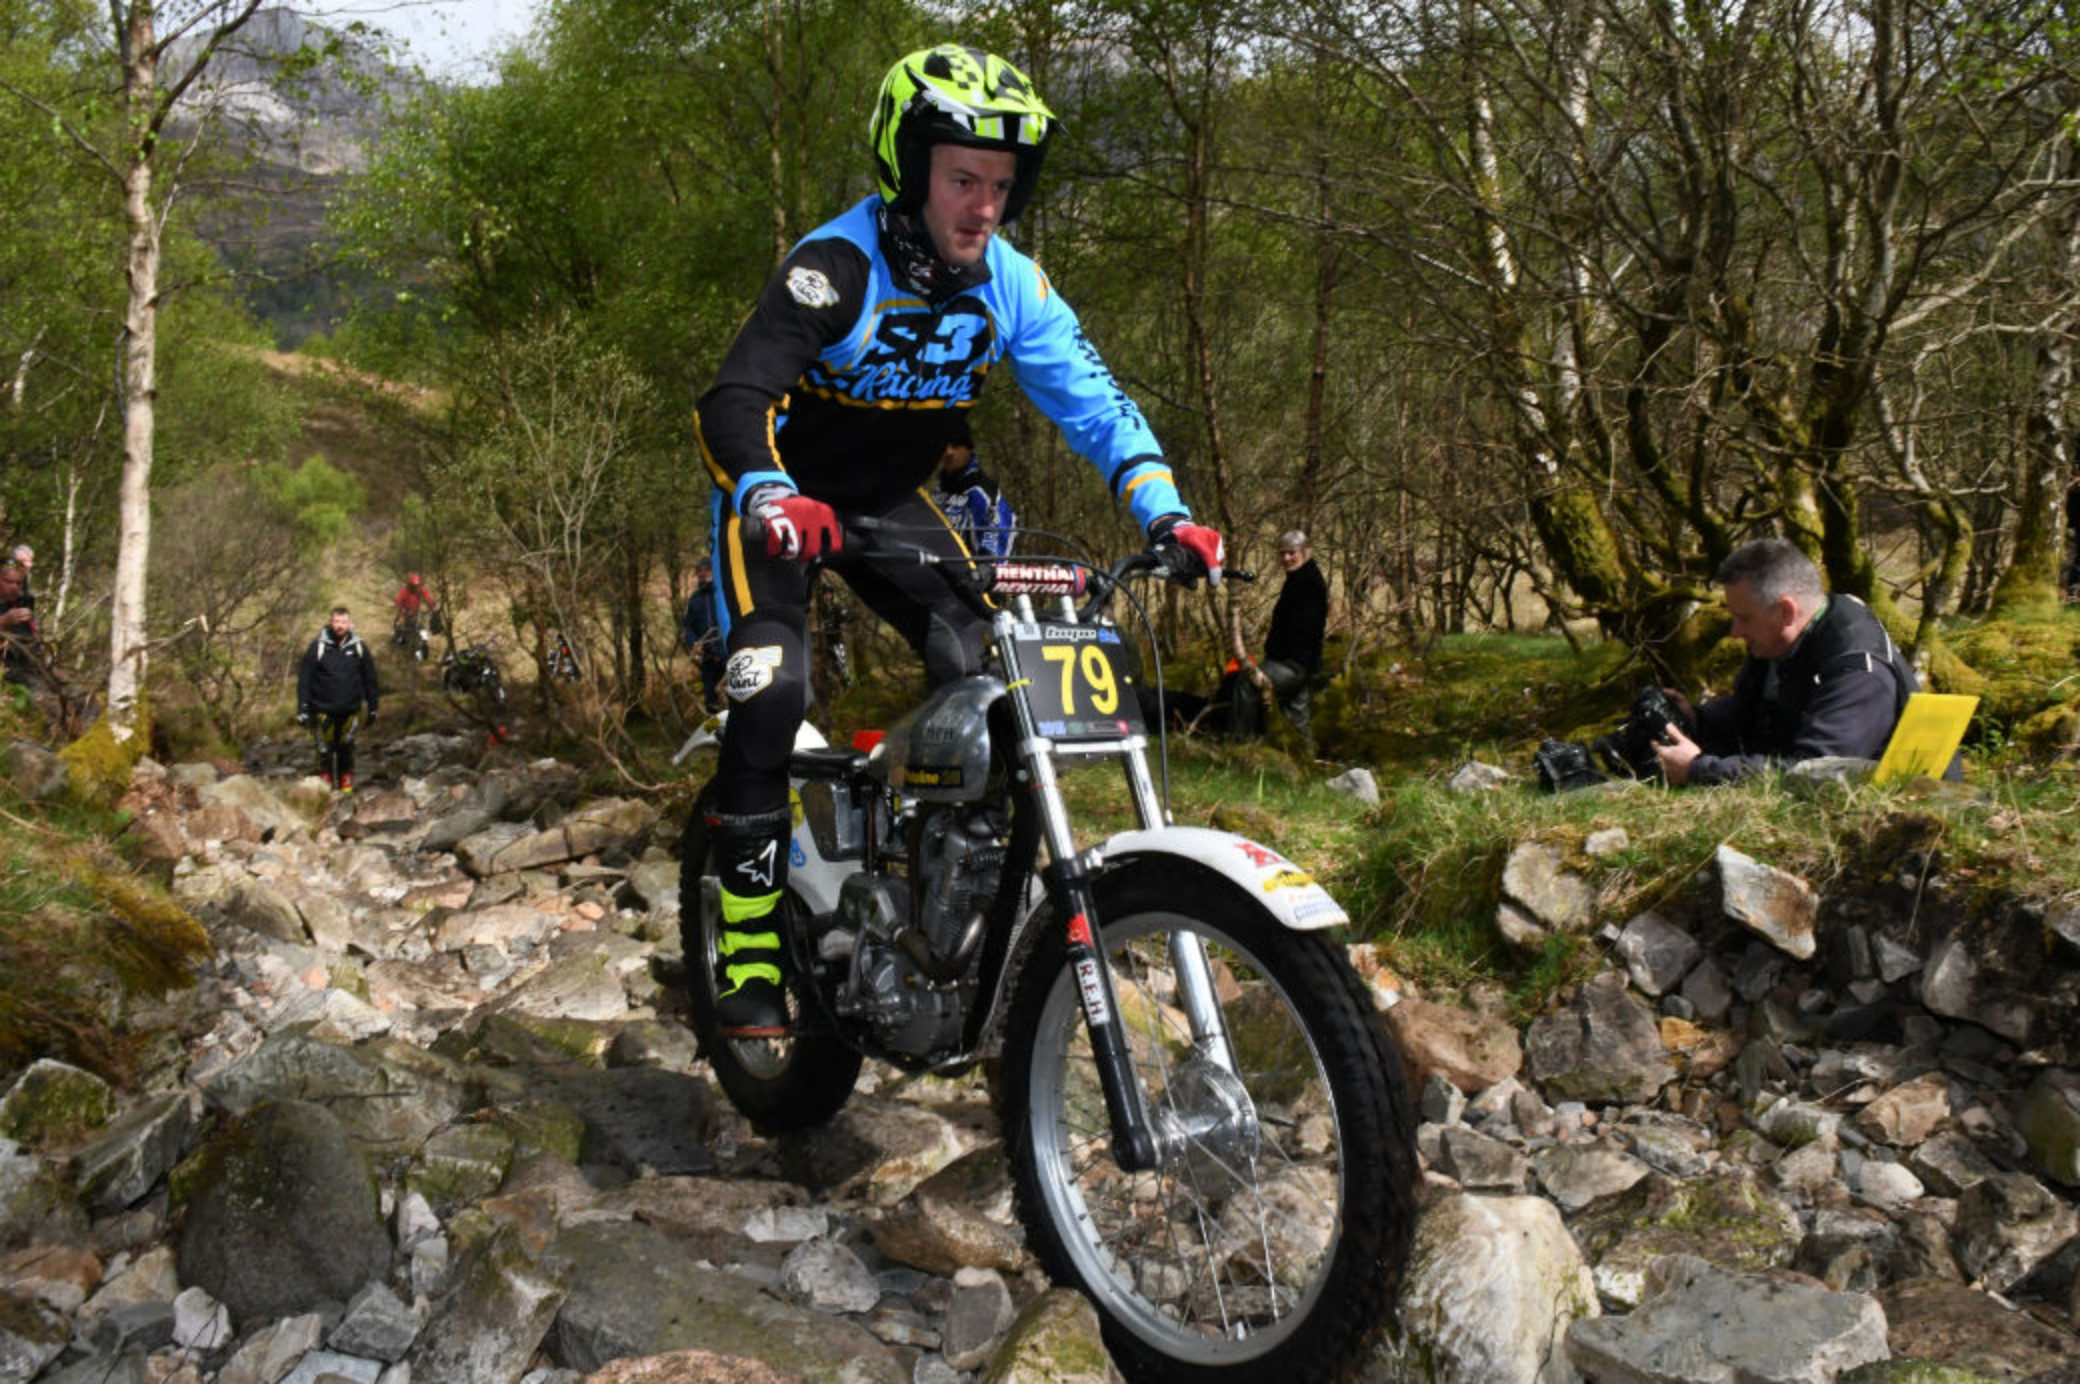 Dan Thorpe makes history at Pre65 Scottish Two Day Trial